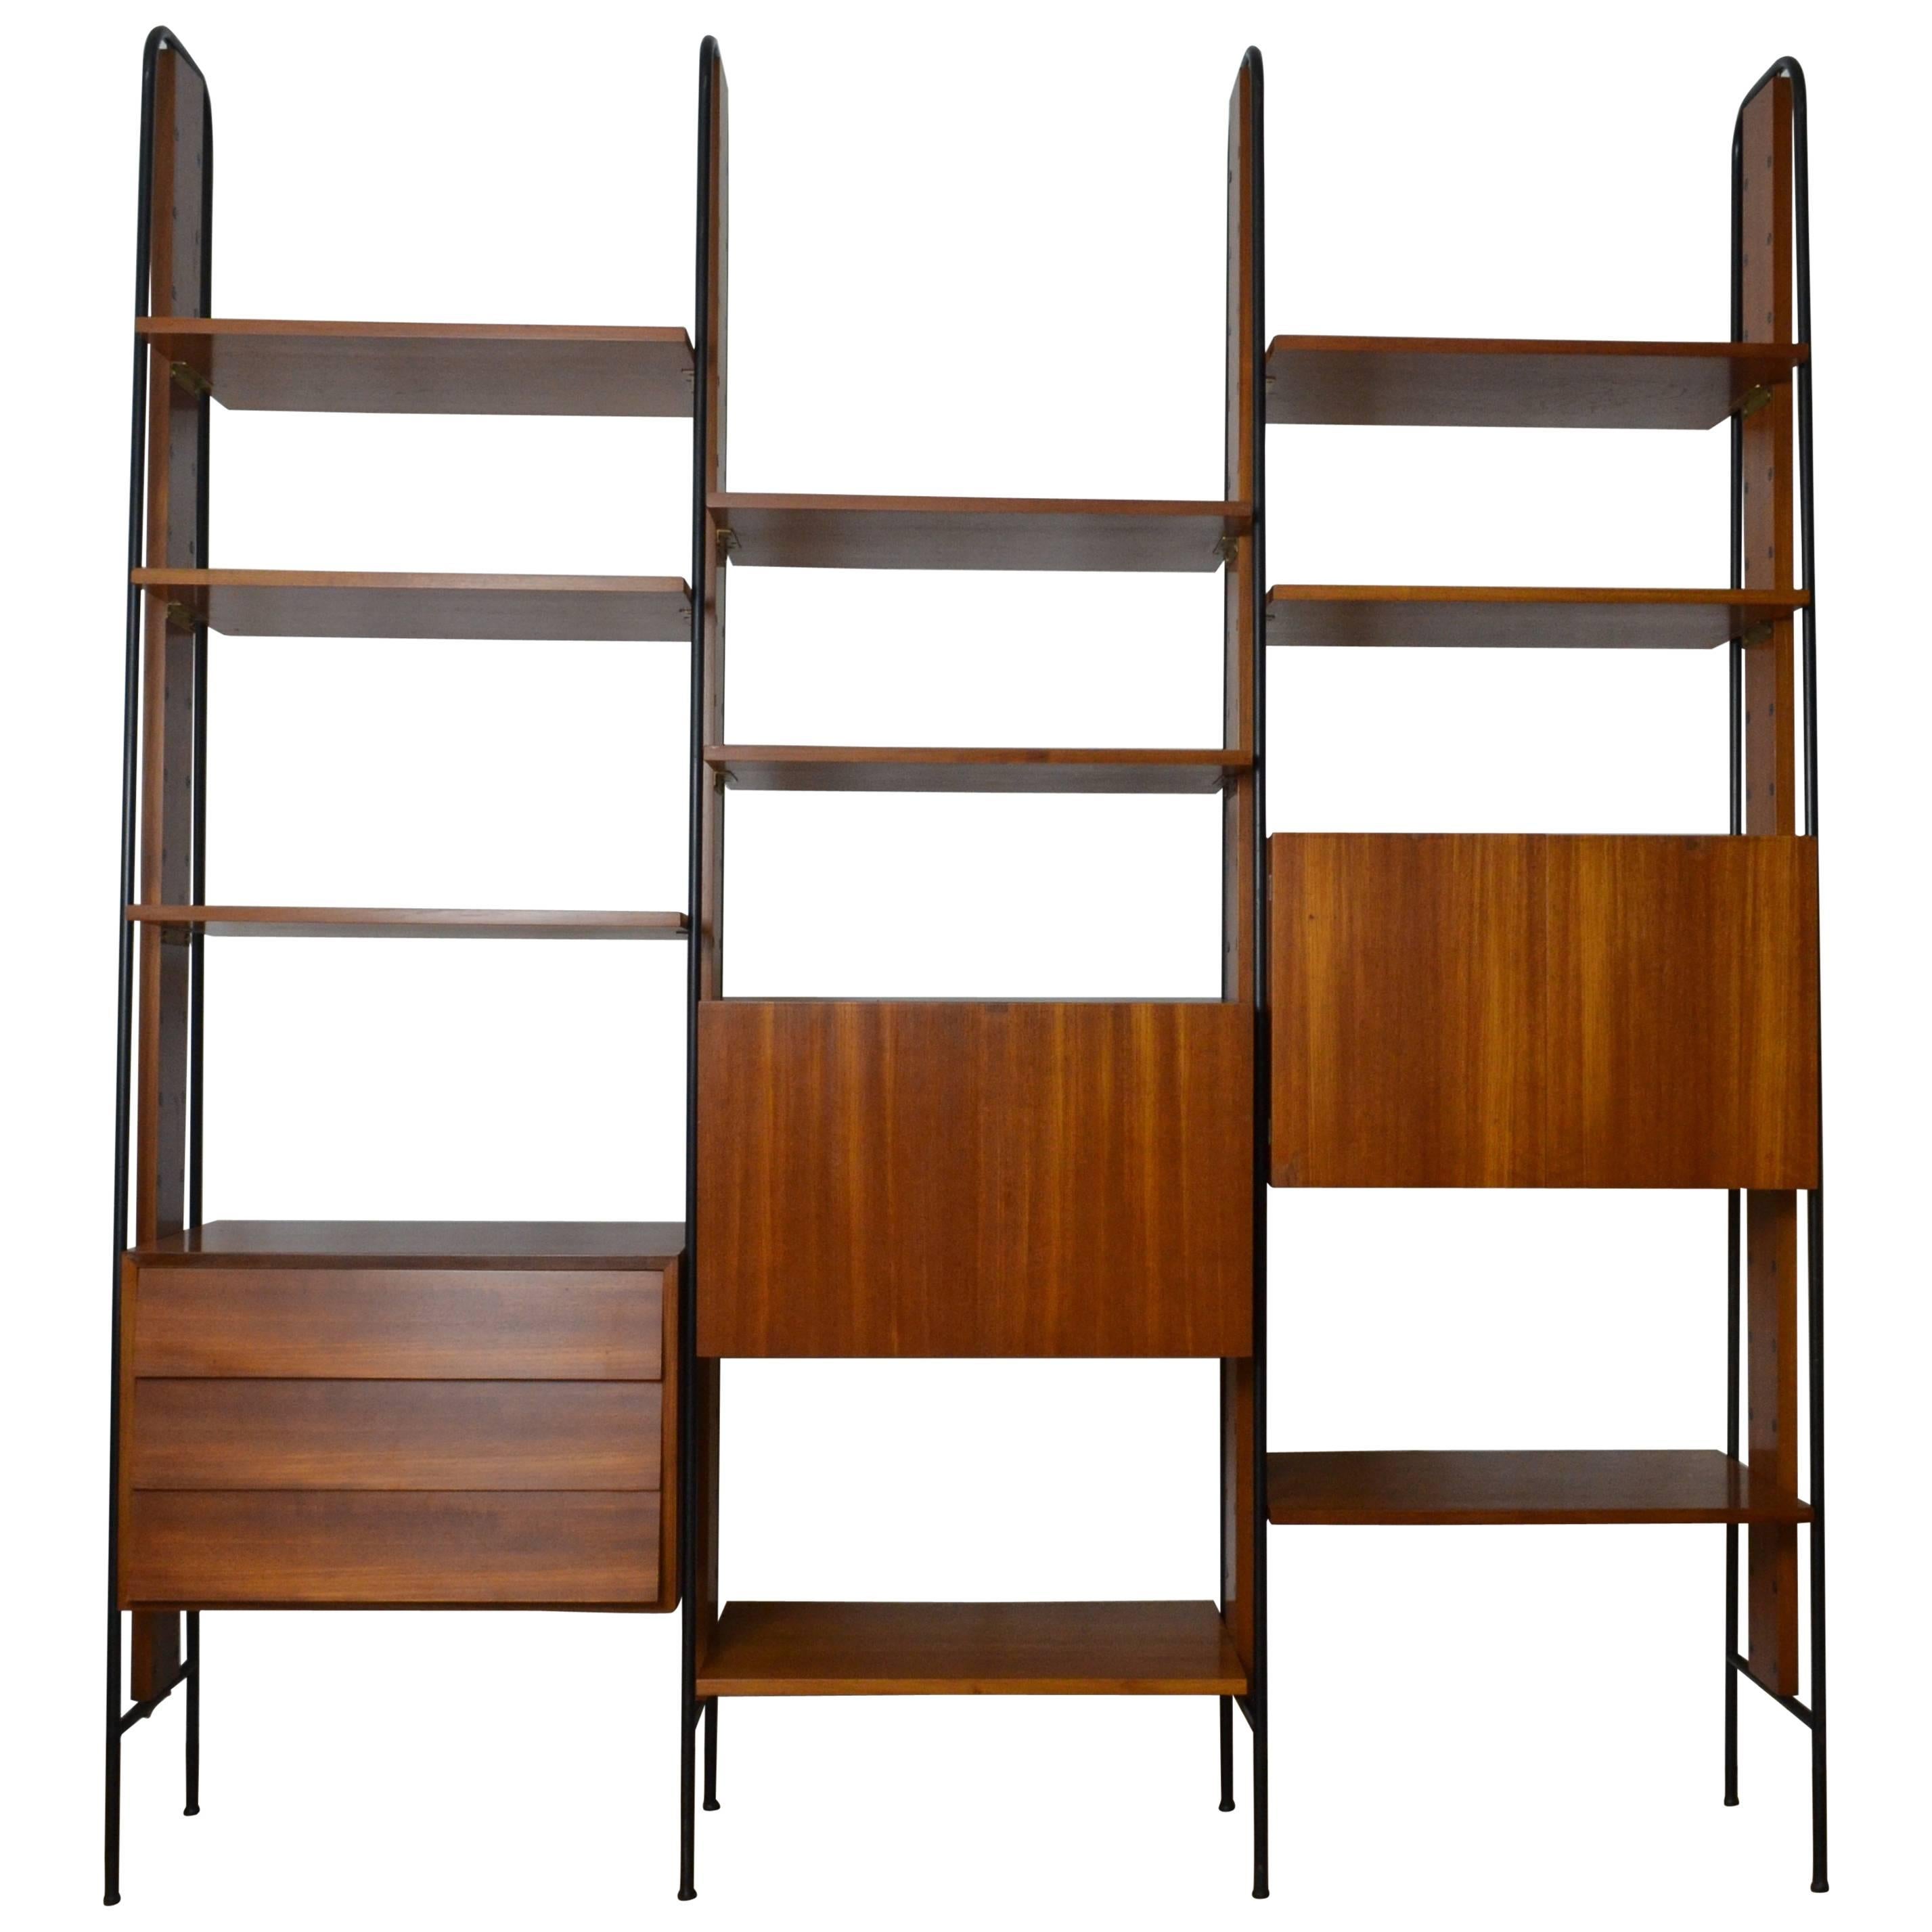 1960s Bookcase with Adjustable Shelves